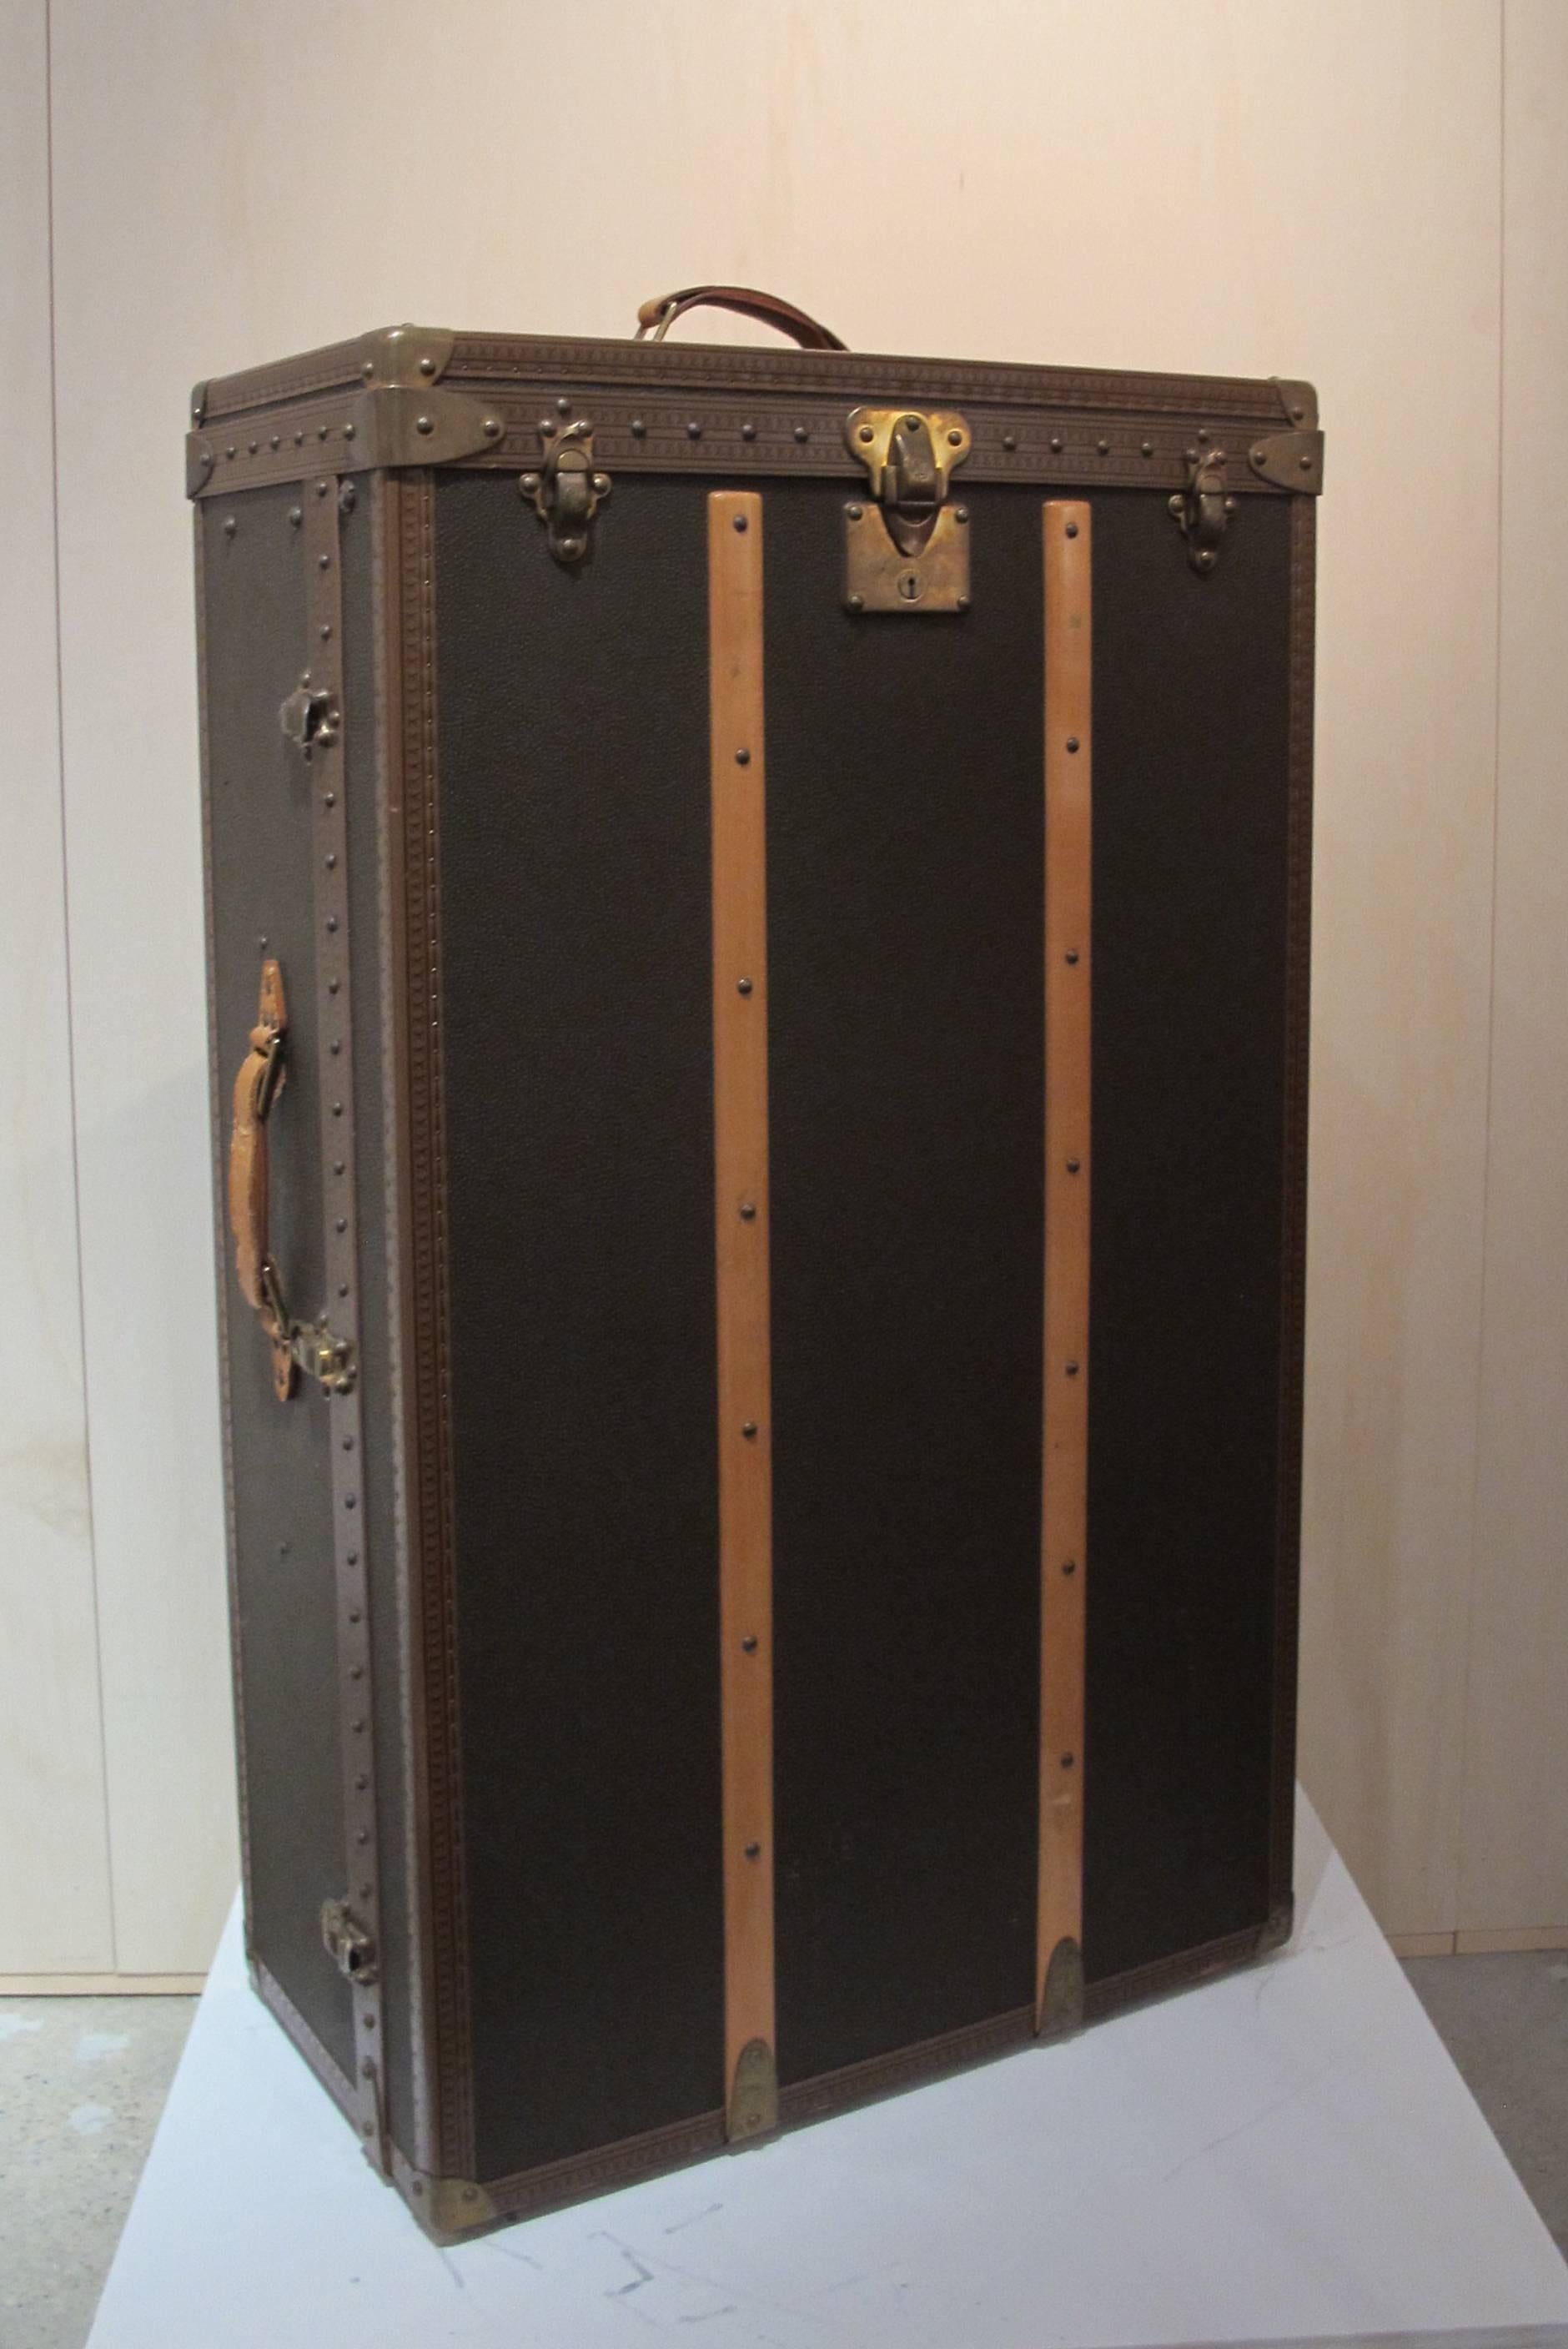 This beautiful custom-made wardrobe trunk from Louis Vuitton is designed in the 1980s. The owner did not want to expose his wealth and therefore requested that the typical and recognizable signature 'LV' would not be applied in the design too